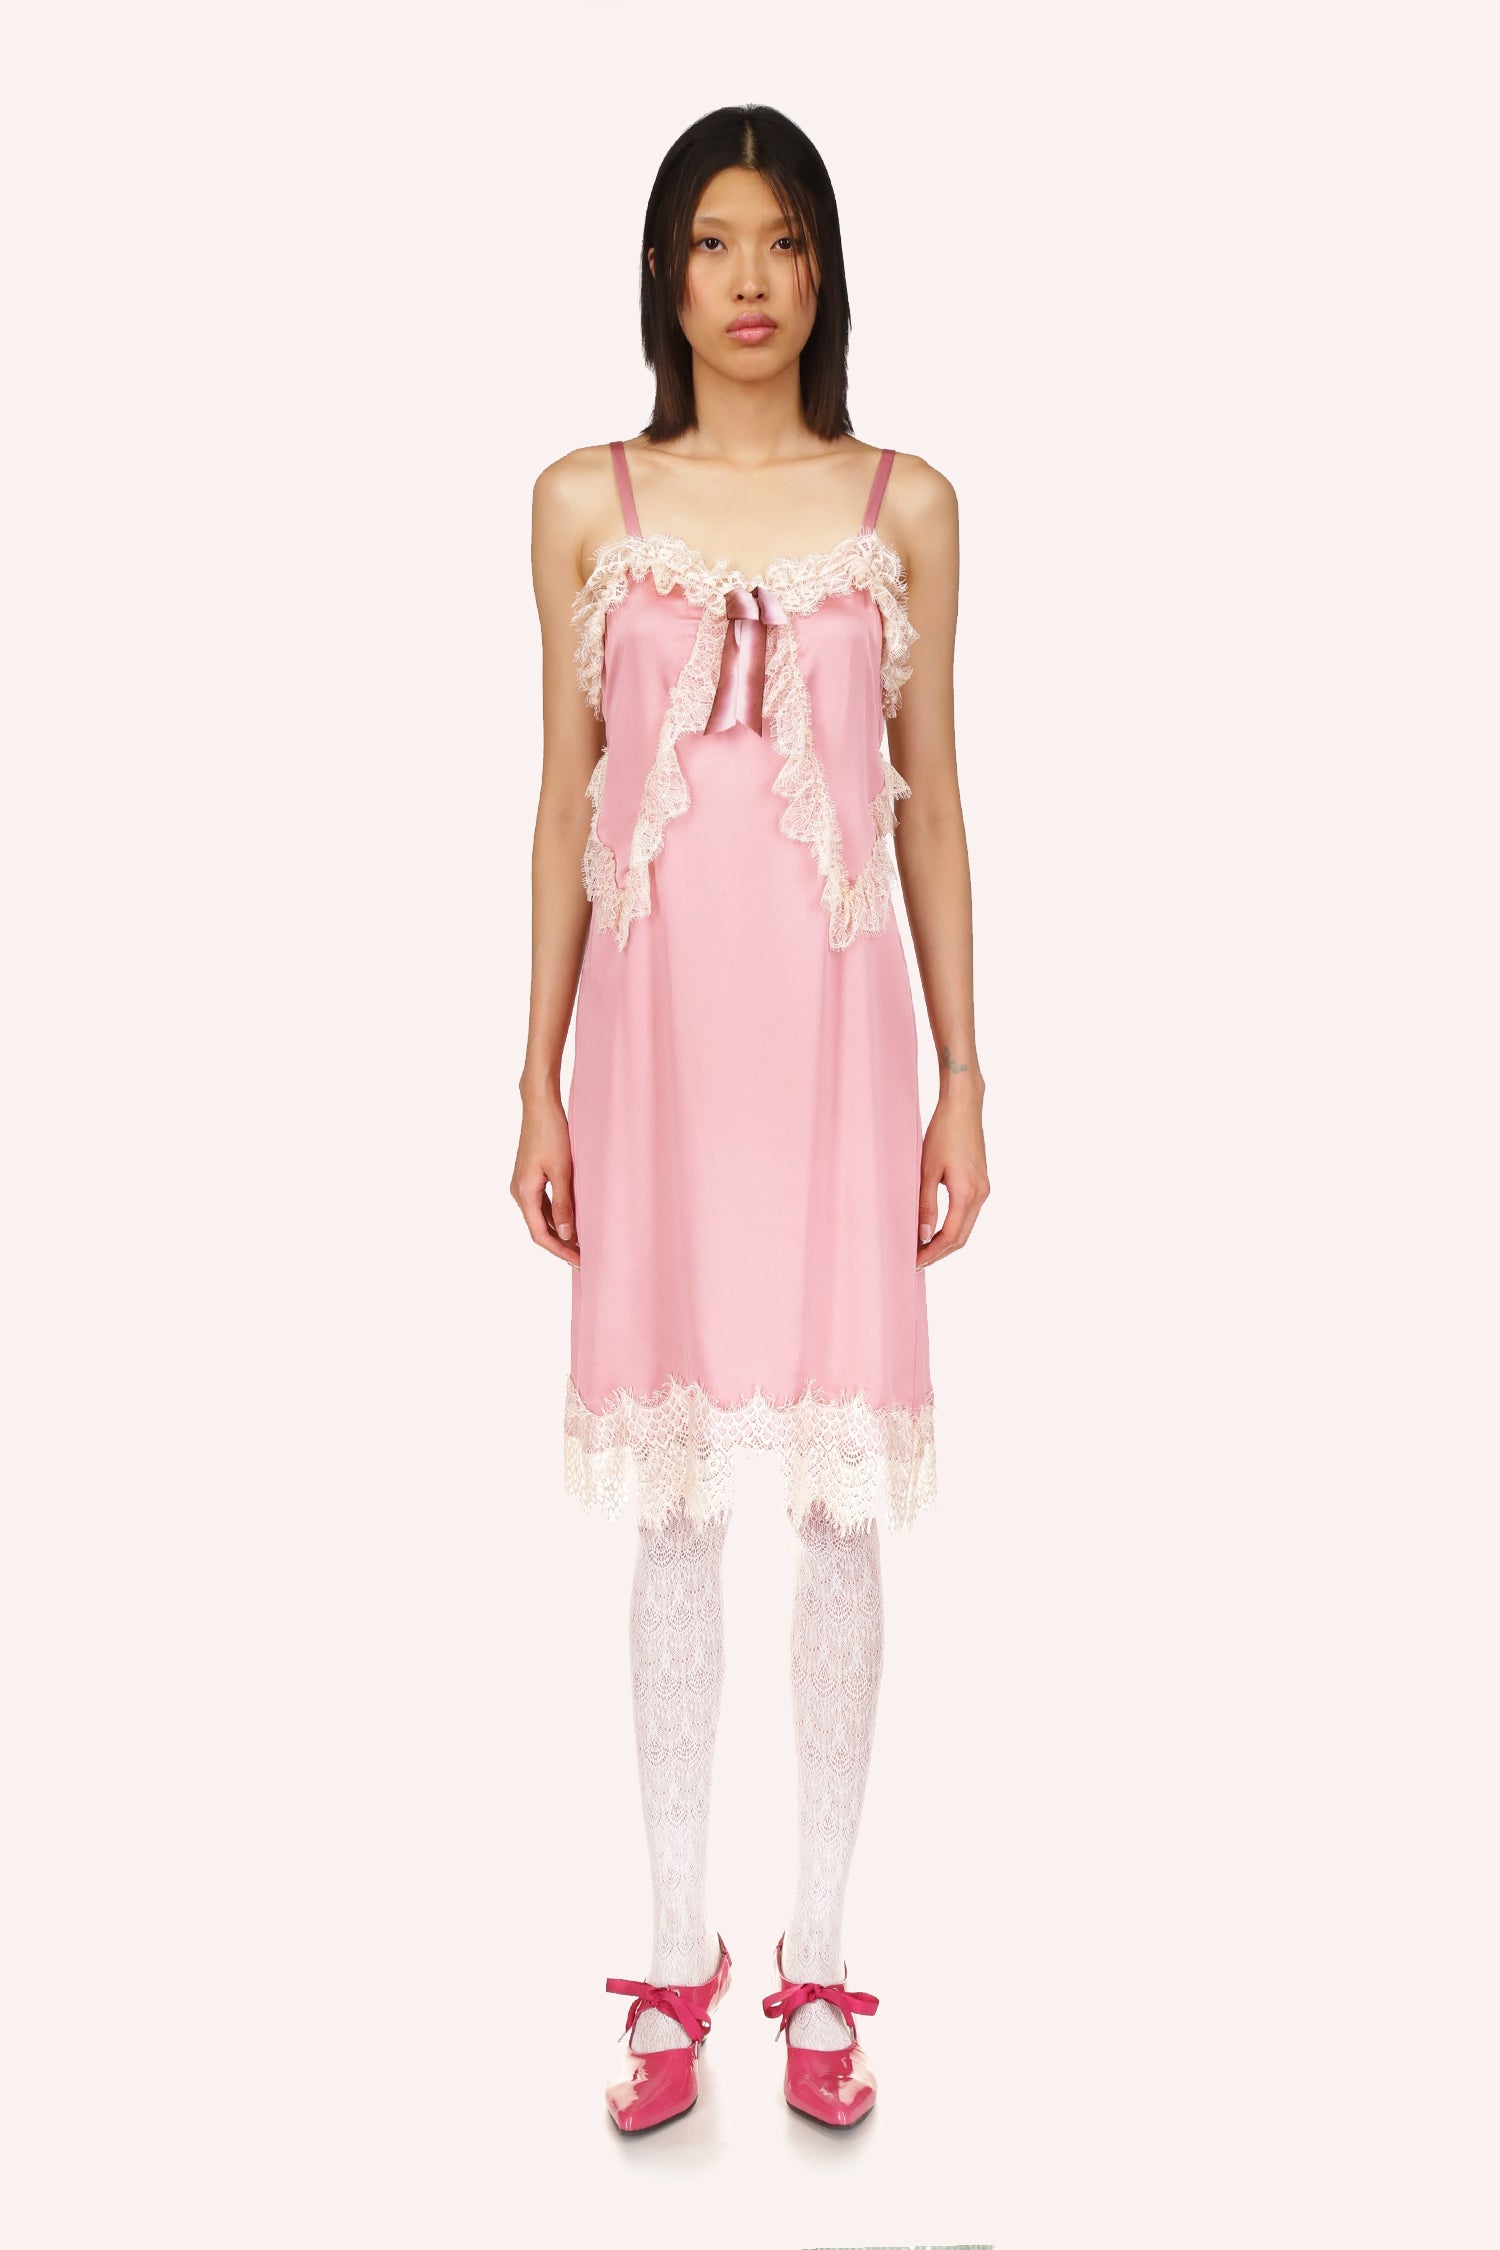 Soiree Satin Rose, knee long, sleeveless, white lace triangle, pink ribbon, shoulders straps, a white lace top and bottom